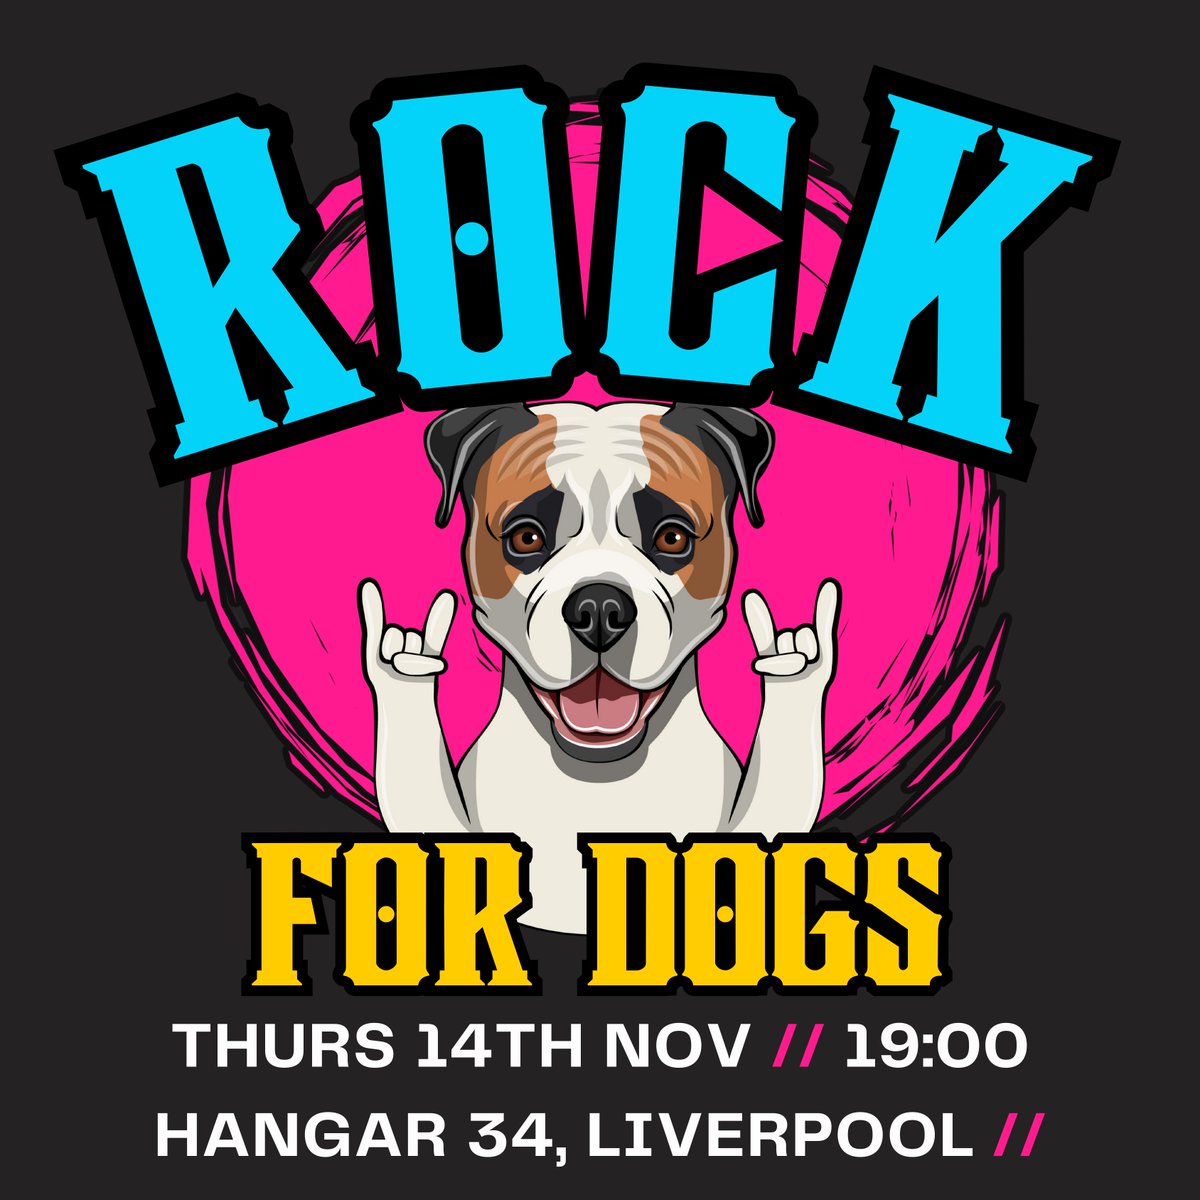 ⚡️Announcement: Ultimate Green Day & Punk Rock 101 are joining forces for a night of ultimate rock ⚡️ Don't miss a night to help raise money for @pawsocietyuk and come Rock for Dogs ! Thursday 14th November Tickets HERE:tinyurl.com/yt5nkz64